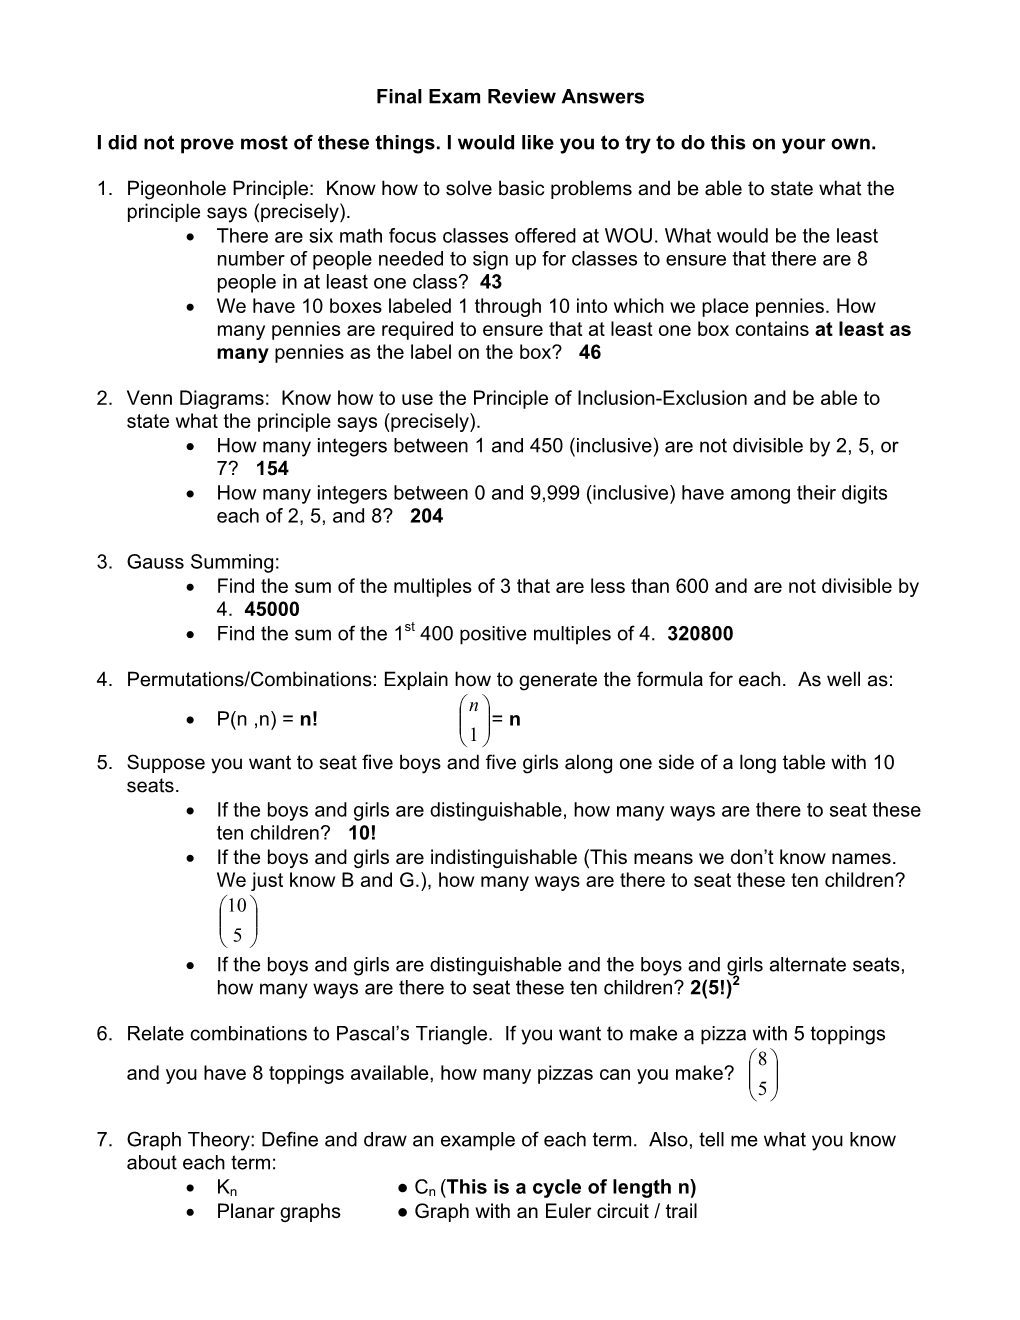 Final Exam Review Answers I Did Not Prove Most of These Things. I Would